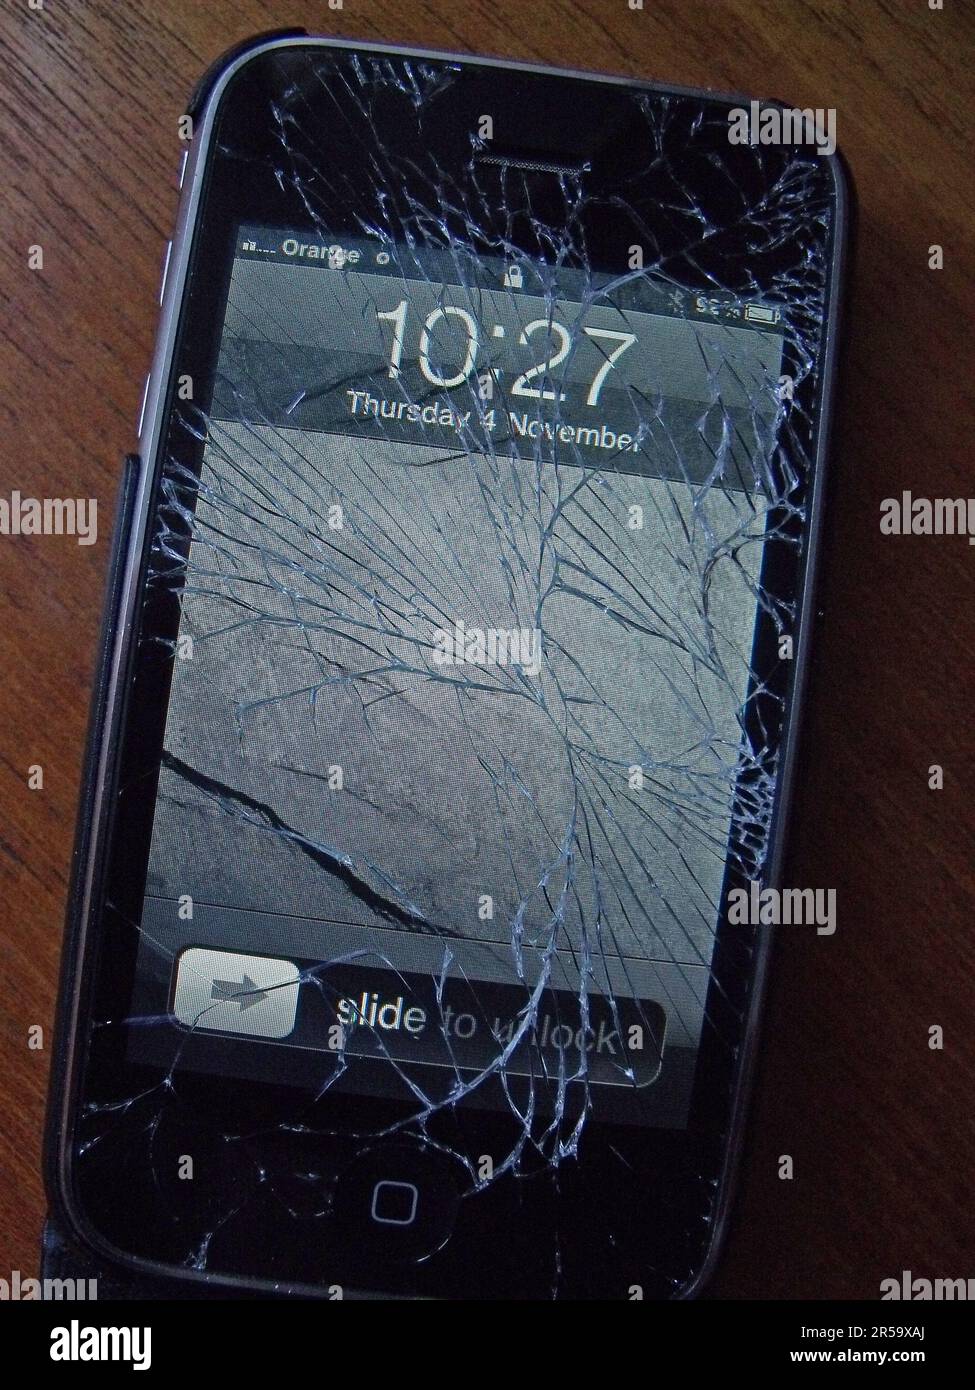 Smashed and cracked screen on an Apple Iphone, still functioning Stock Photo